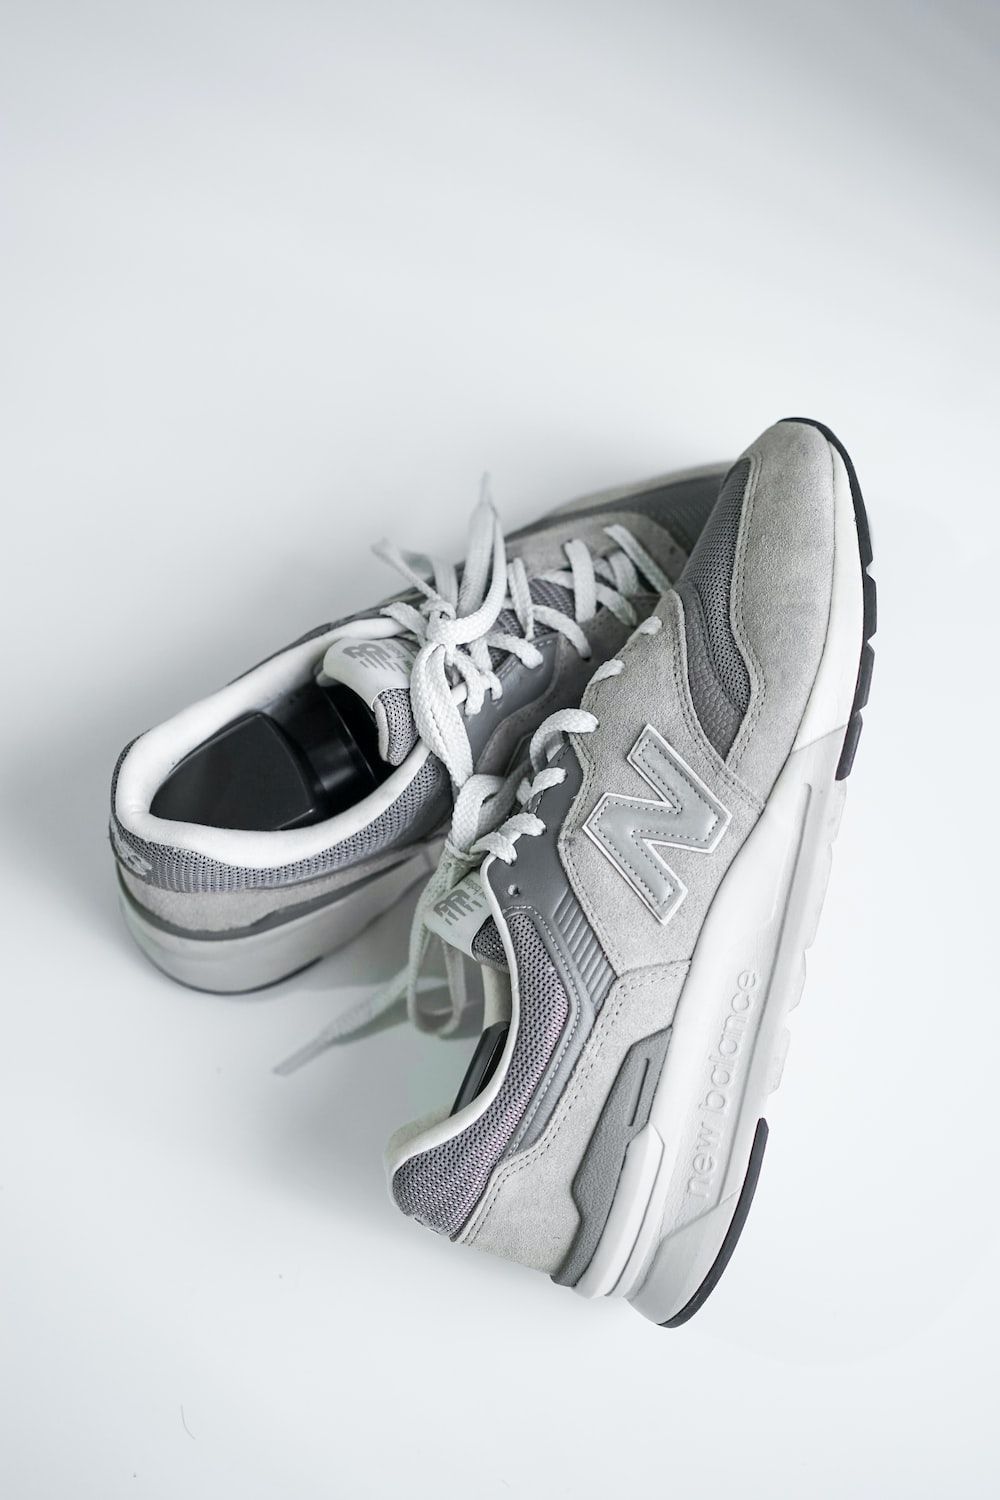 New Balance Picture. Download Free